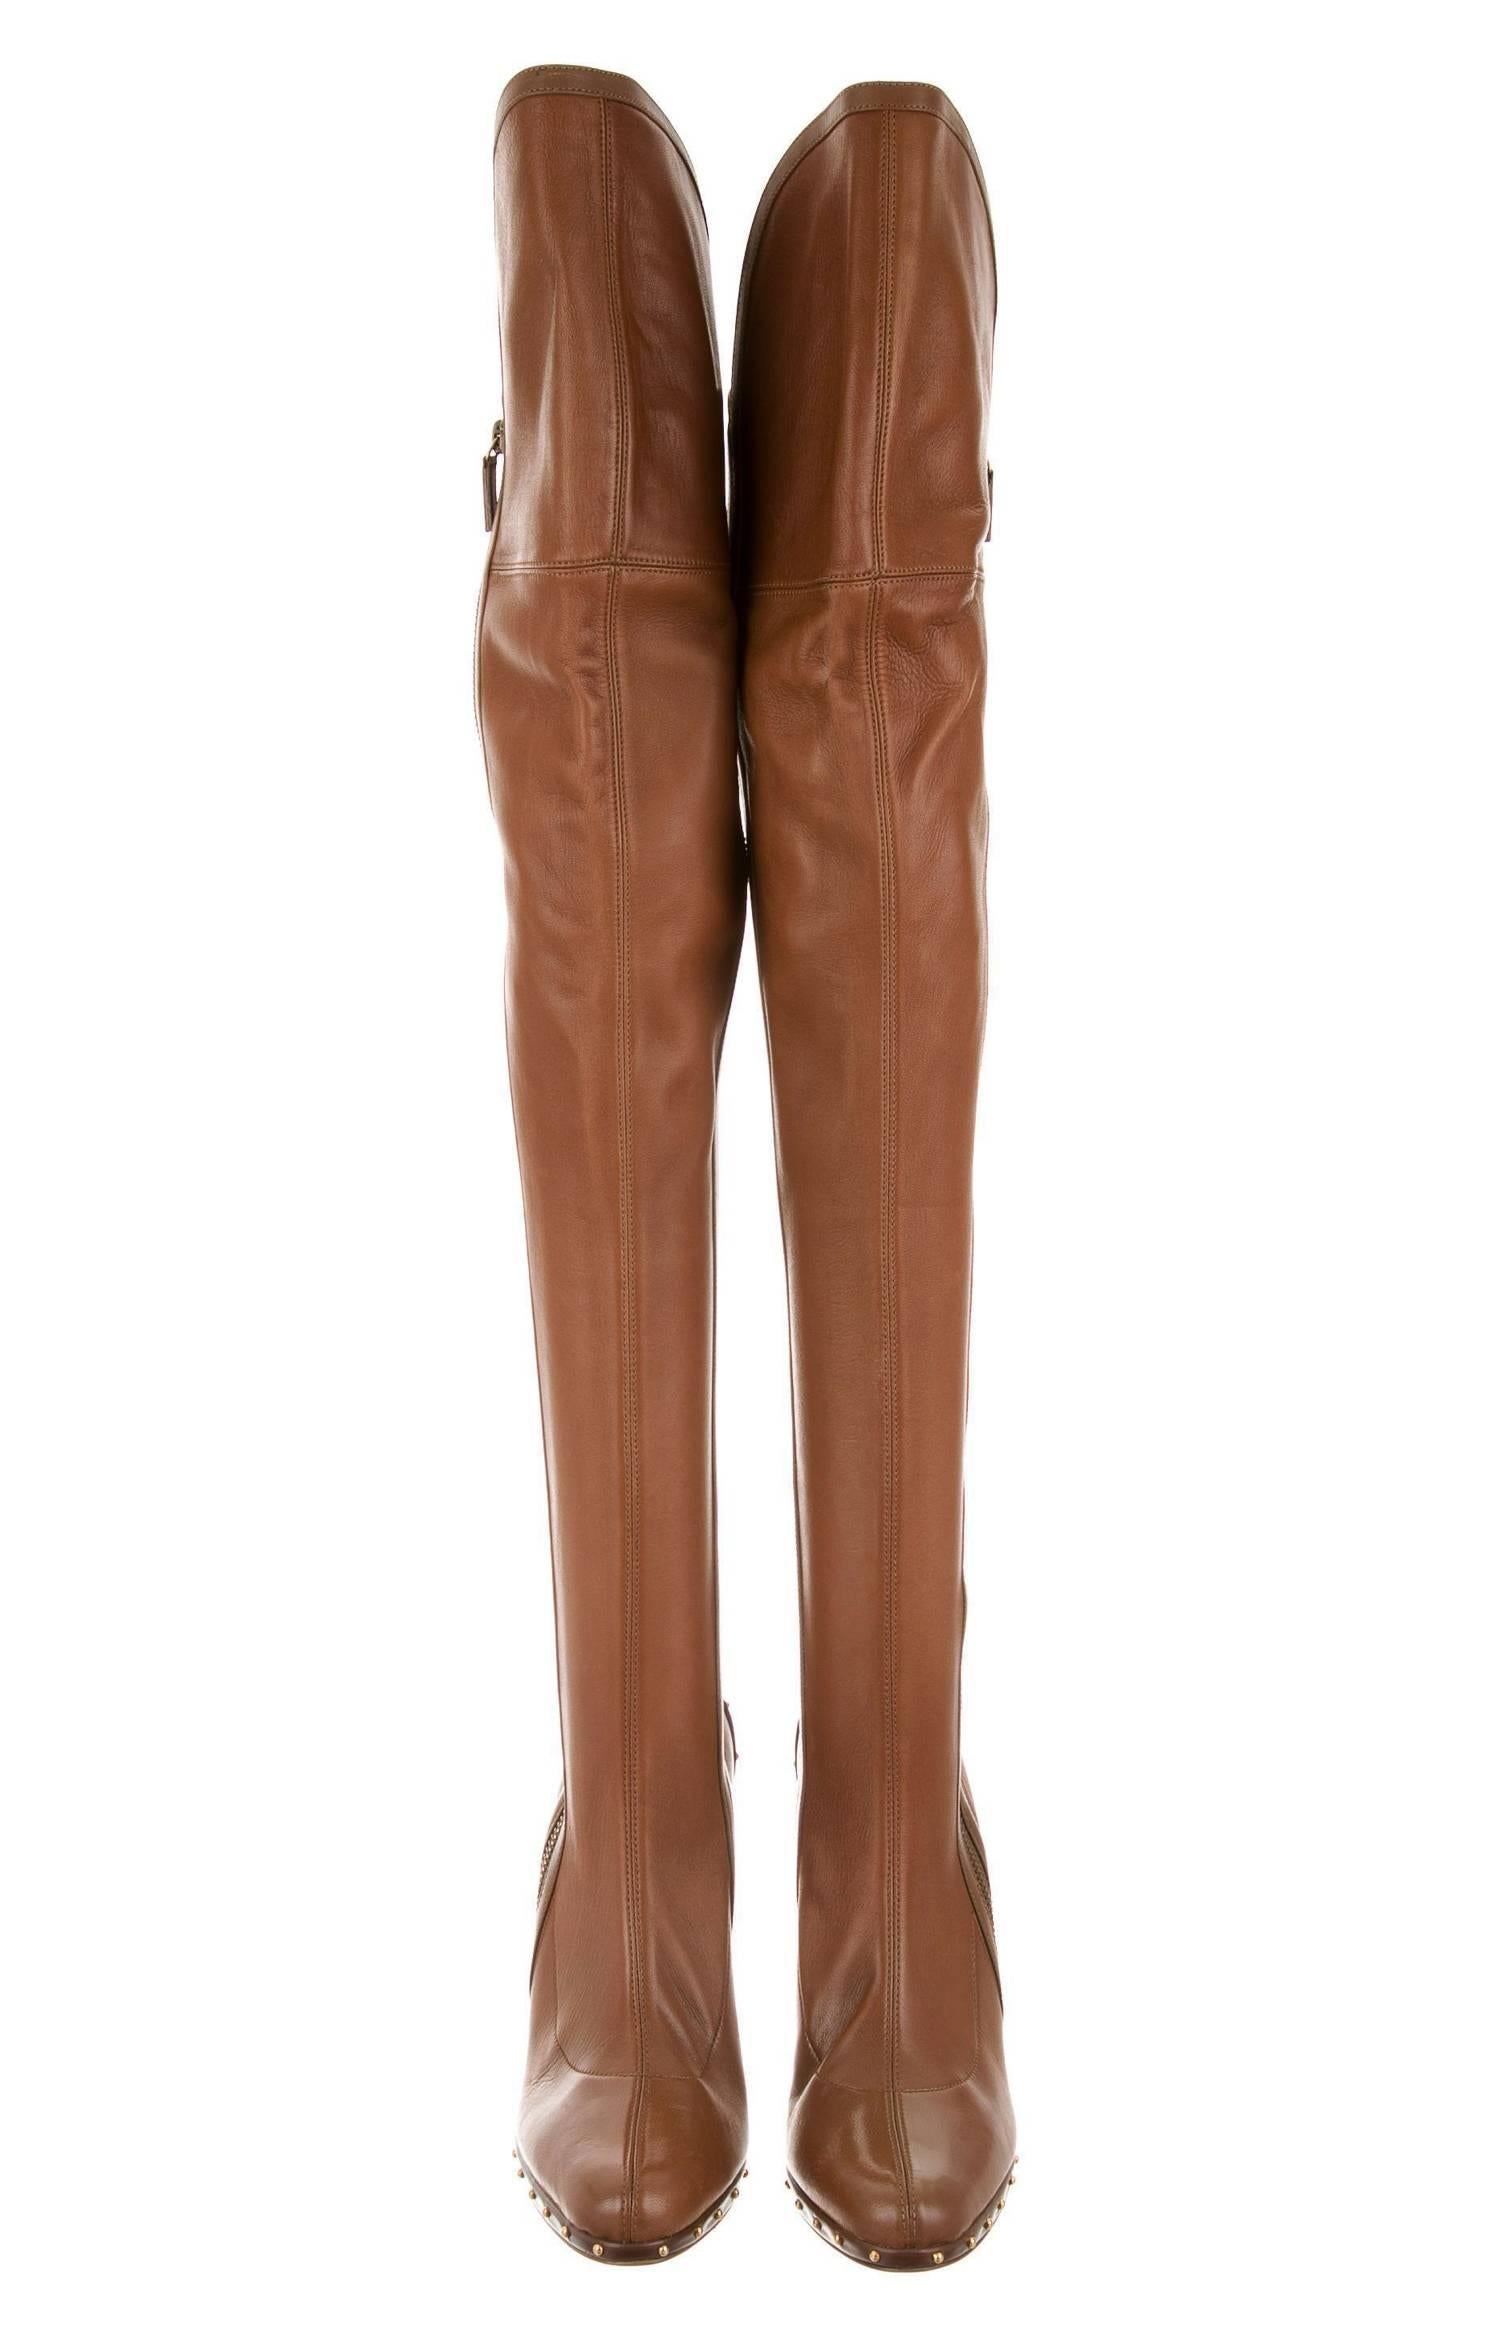 Tom Ford for Gucci Campaign Sexy Leather Boots
Designer size 39 C - US 9 C
F/W 2003 Collection
Brown Soft Nappa Gloveskin Leather Over the Knee Boots
Decorated with Gold-tone Metal Studs 
Full Zipper Side Closure
Made in Italy
New ( display model )